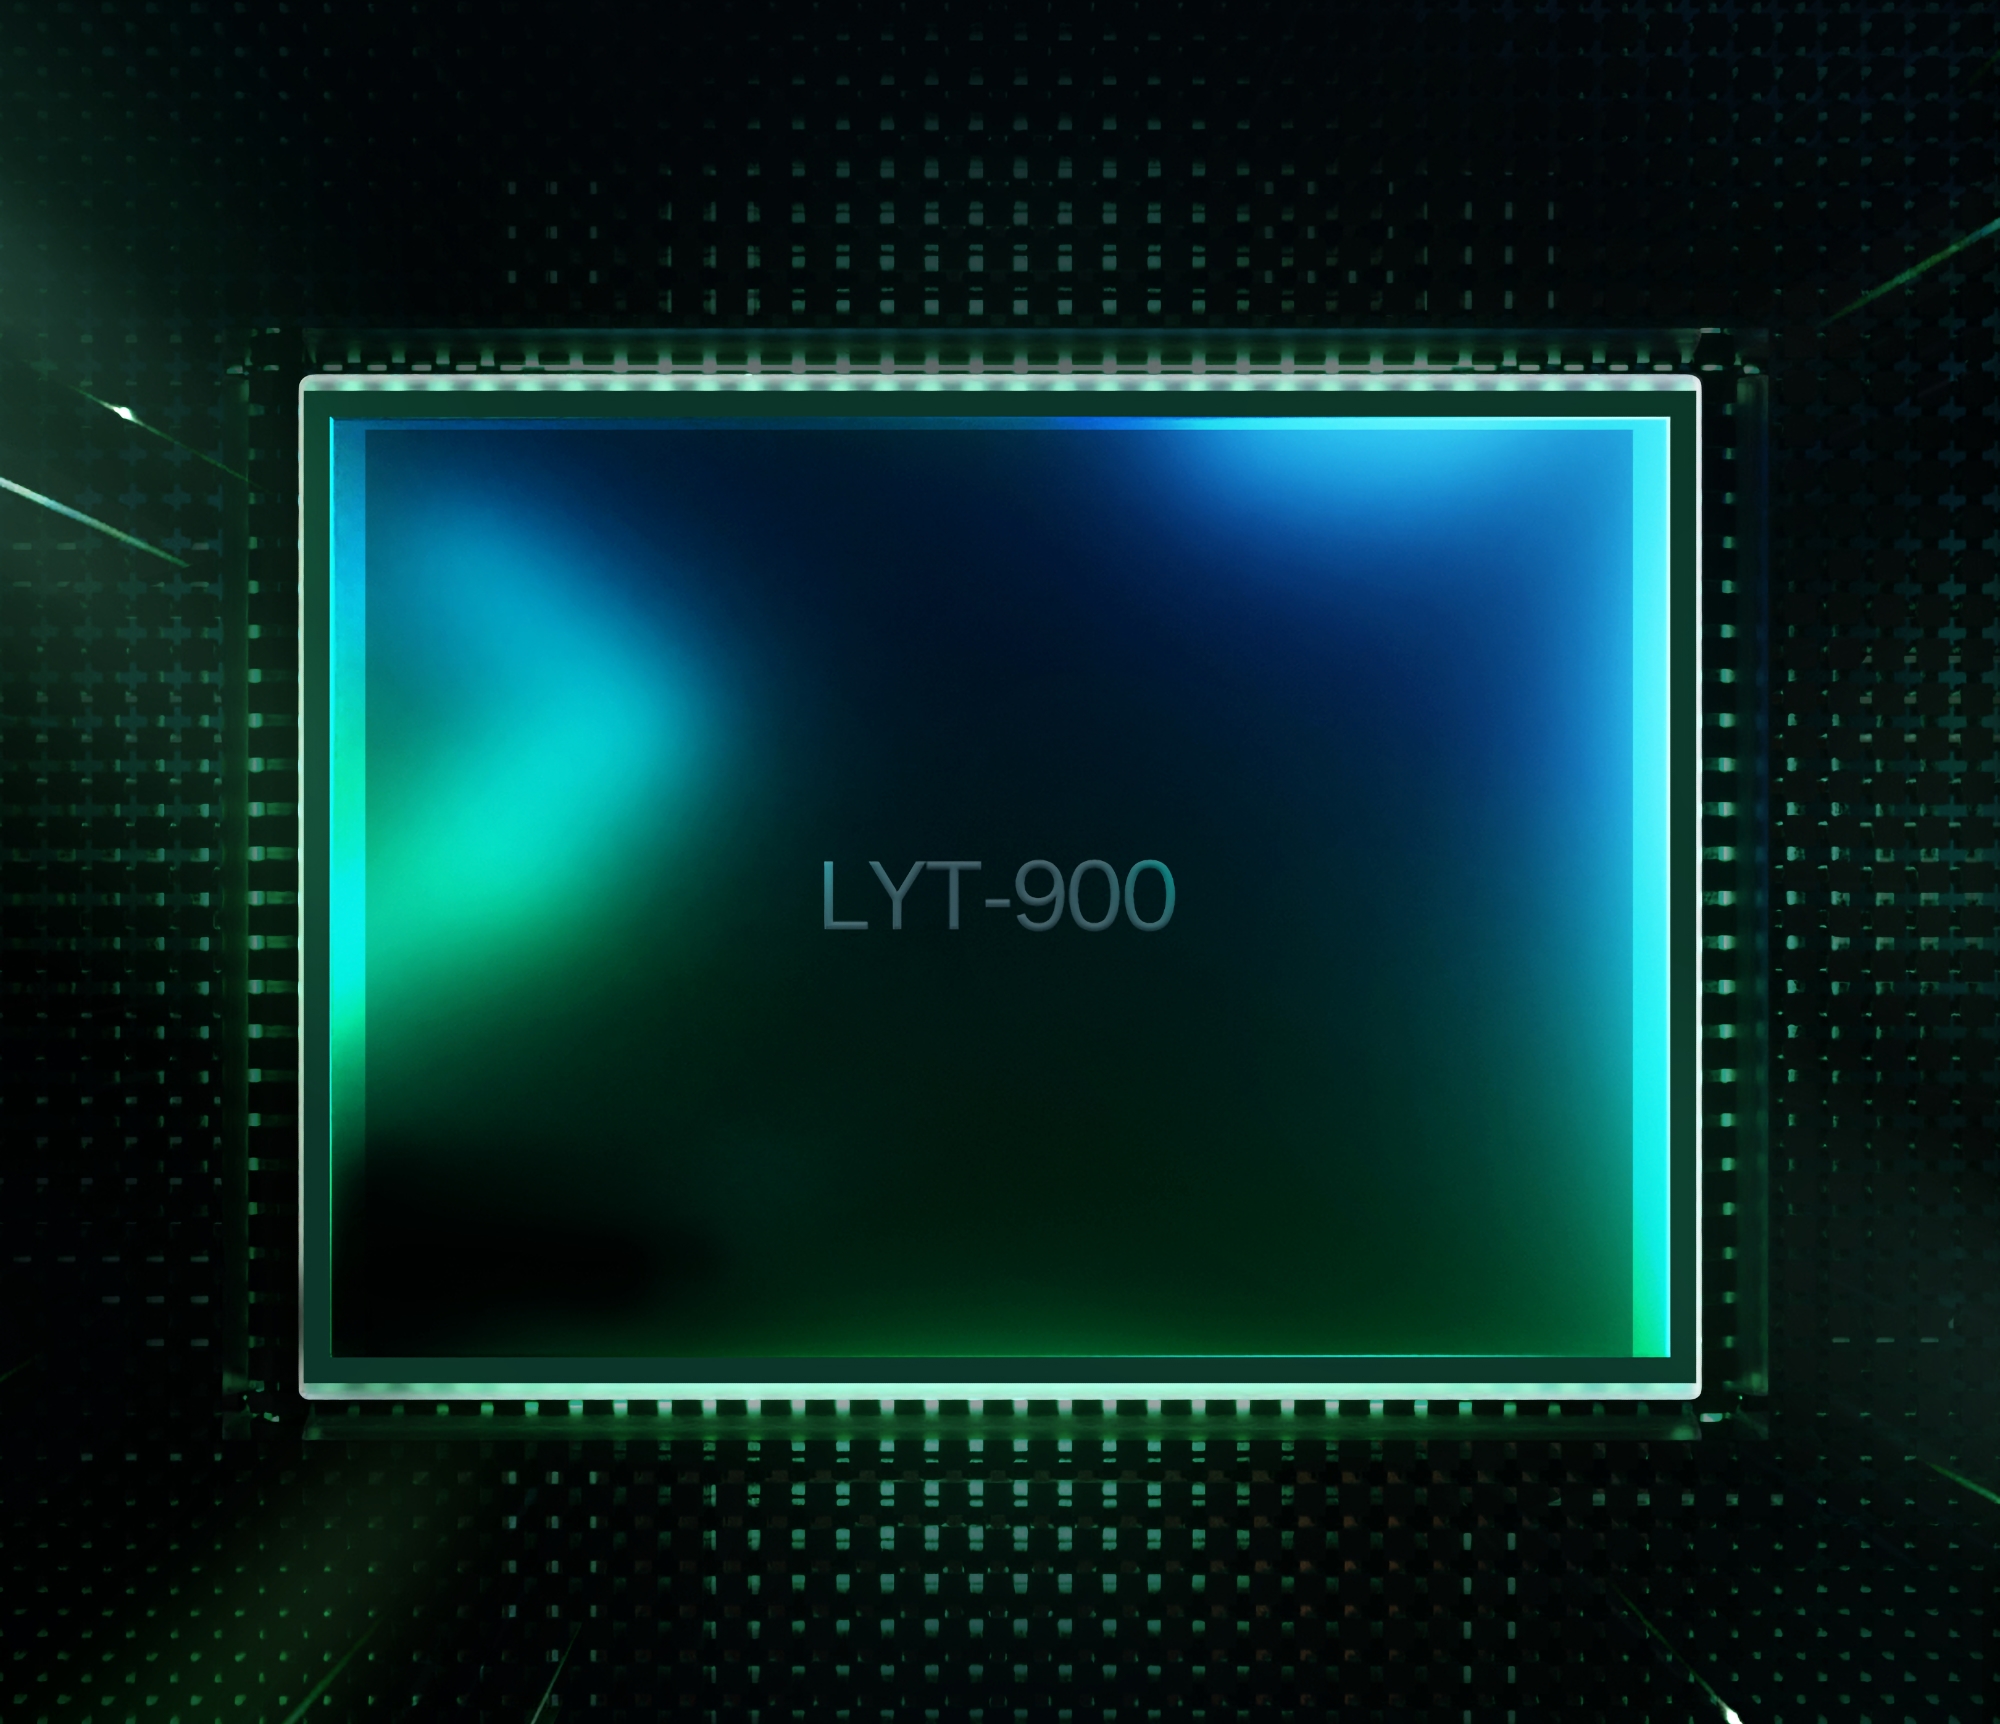 OPPO has confirmed that one of the Find X7 smartphones will get Sony's LYT-900 sensor